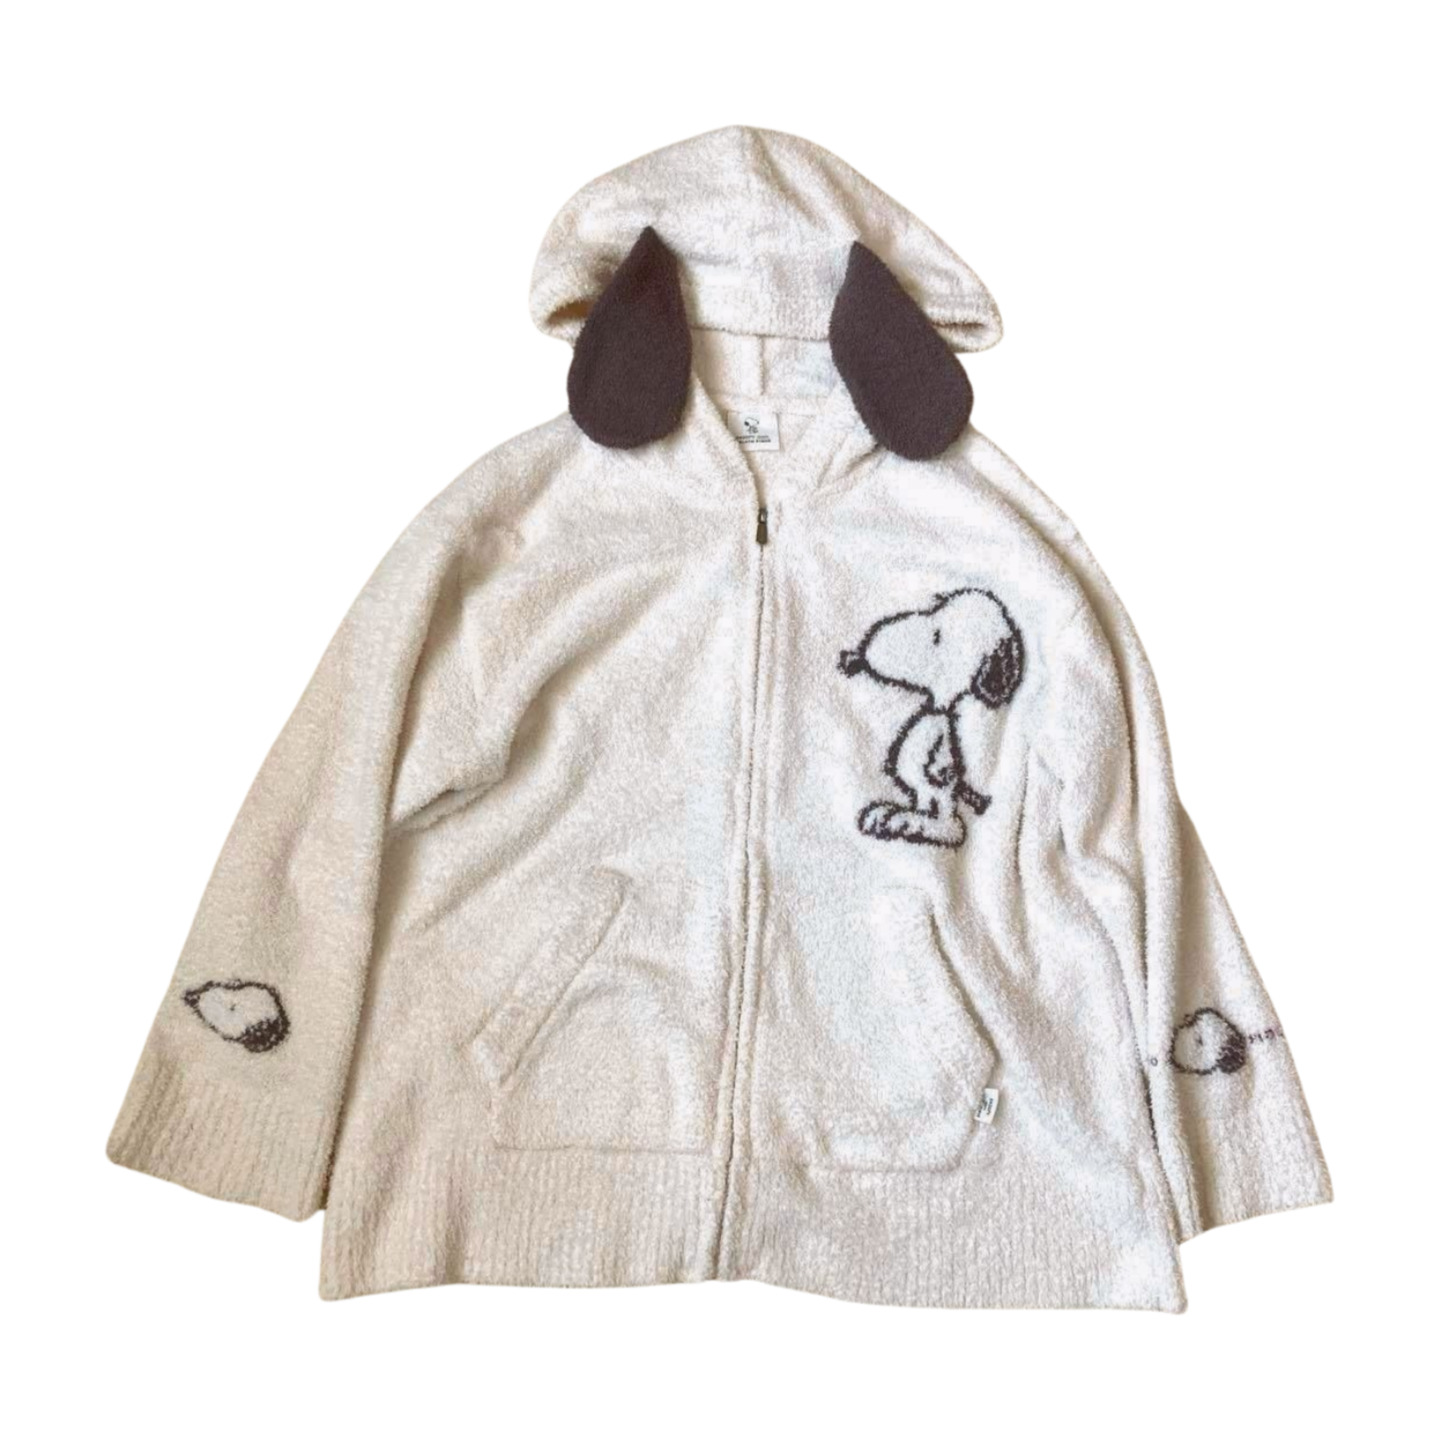 Gelato Pique x Snoopy Jacquard Hoodie Free Size White From Japan Unused 